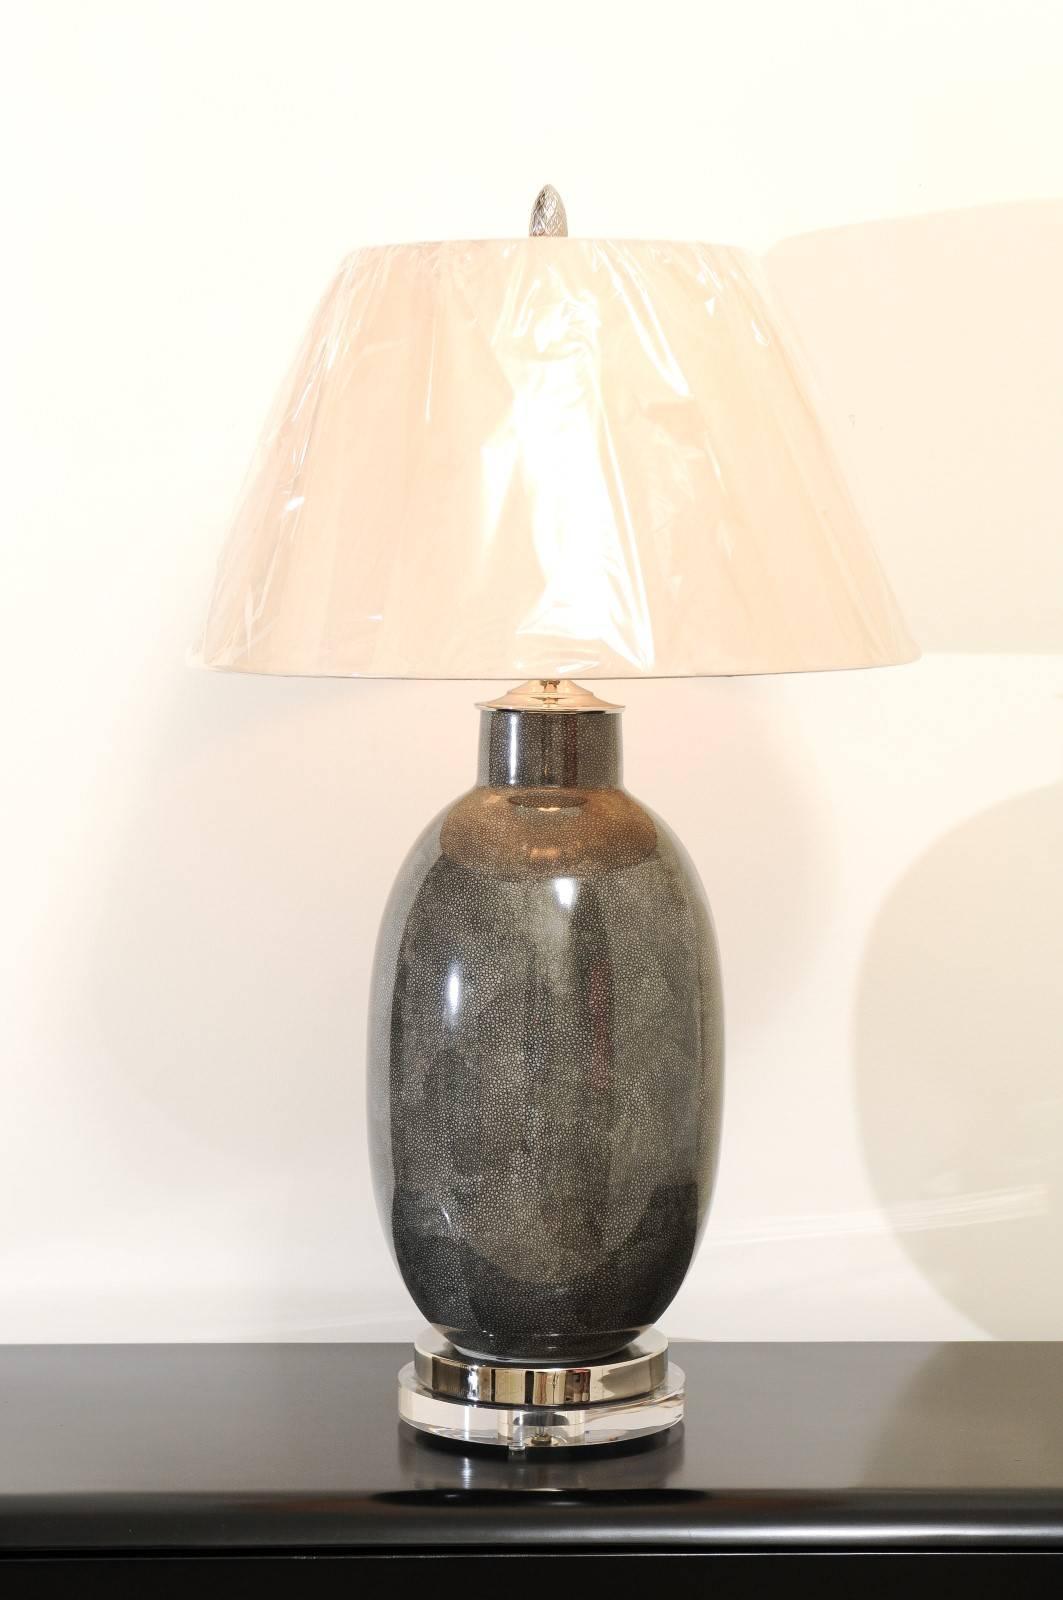 A stunning pair of ceramic vessels as custom-made lamps. Beautiful form and scale with a charcoal colored finish that portrays the look of shagreen. Expertly crafted using components of only the finest quality. Exceptional jewelry! Excellent